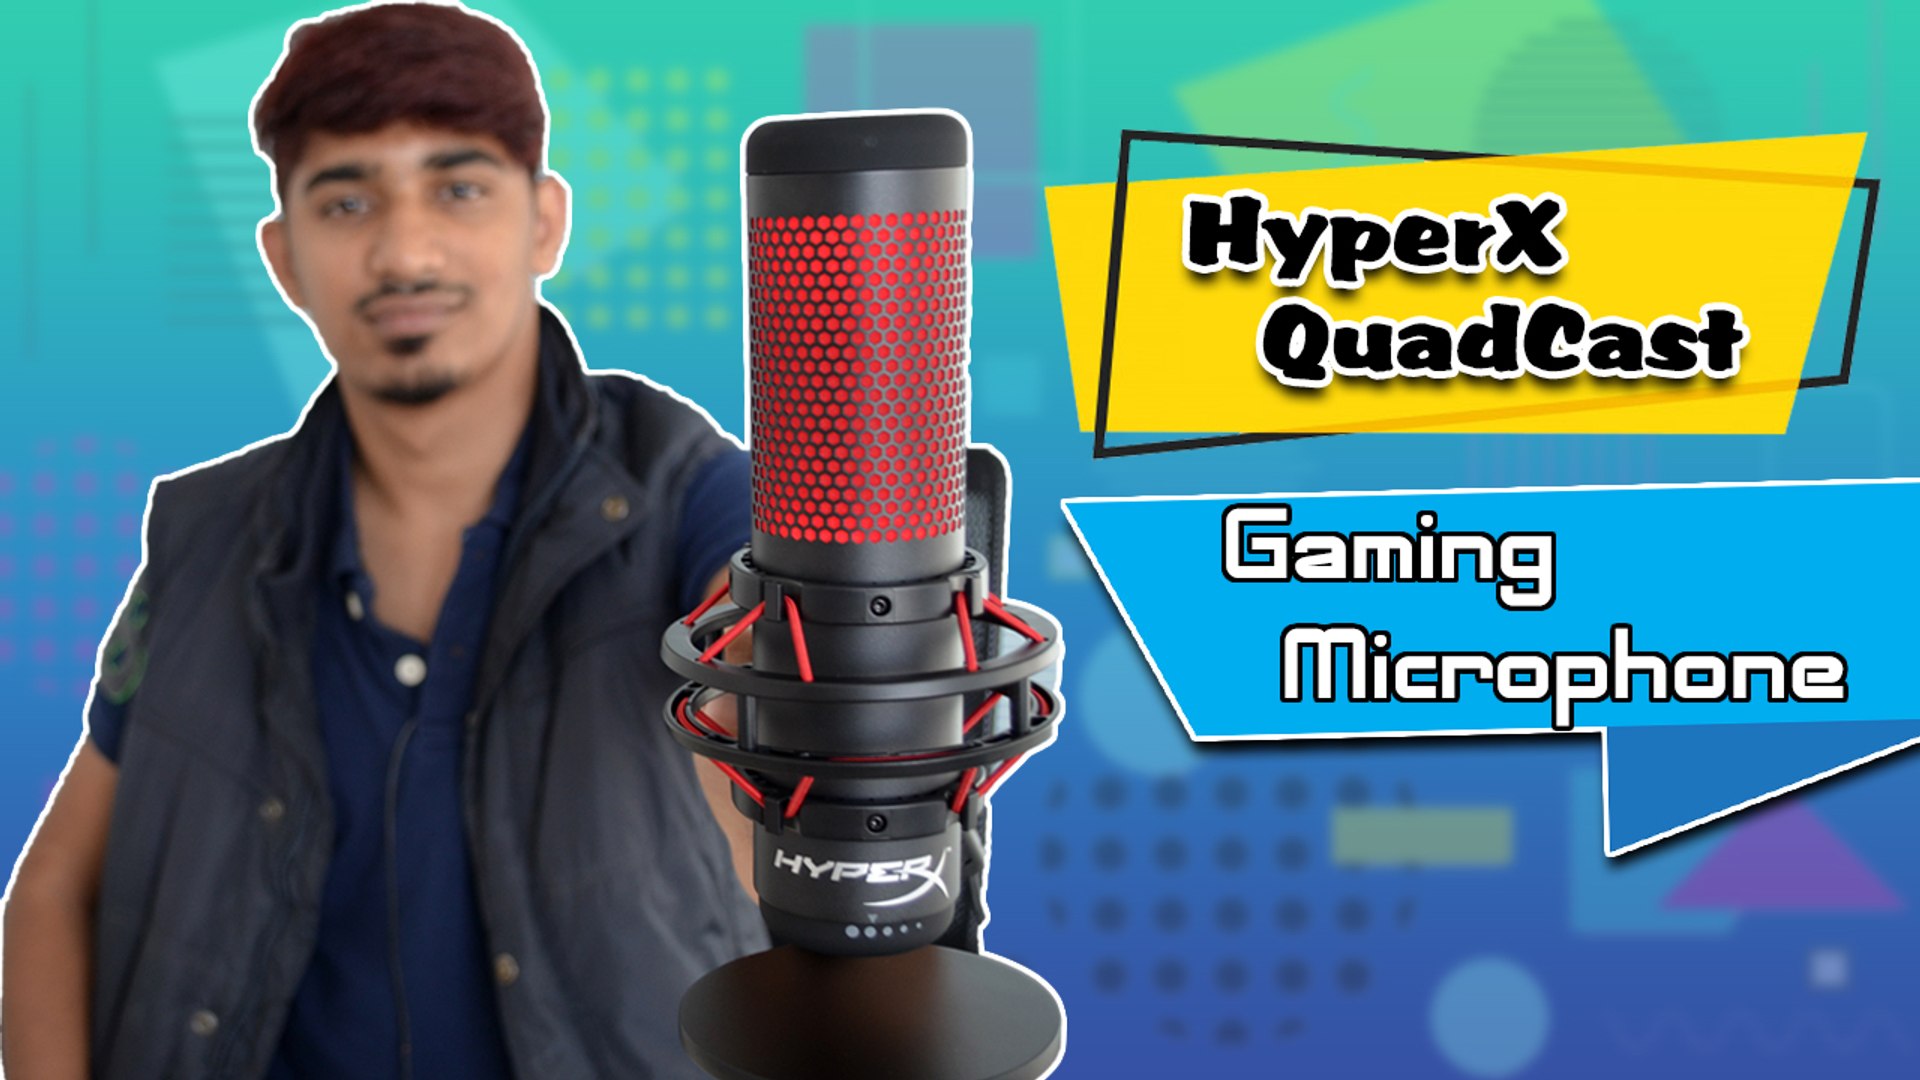 Hyperx Quadcast Gaming Microphone Unboxing And First Impression